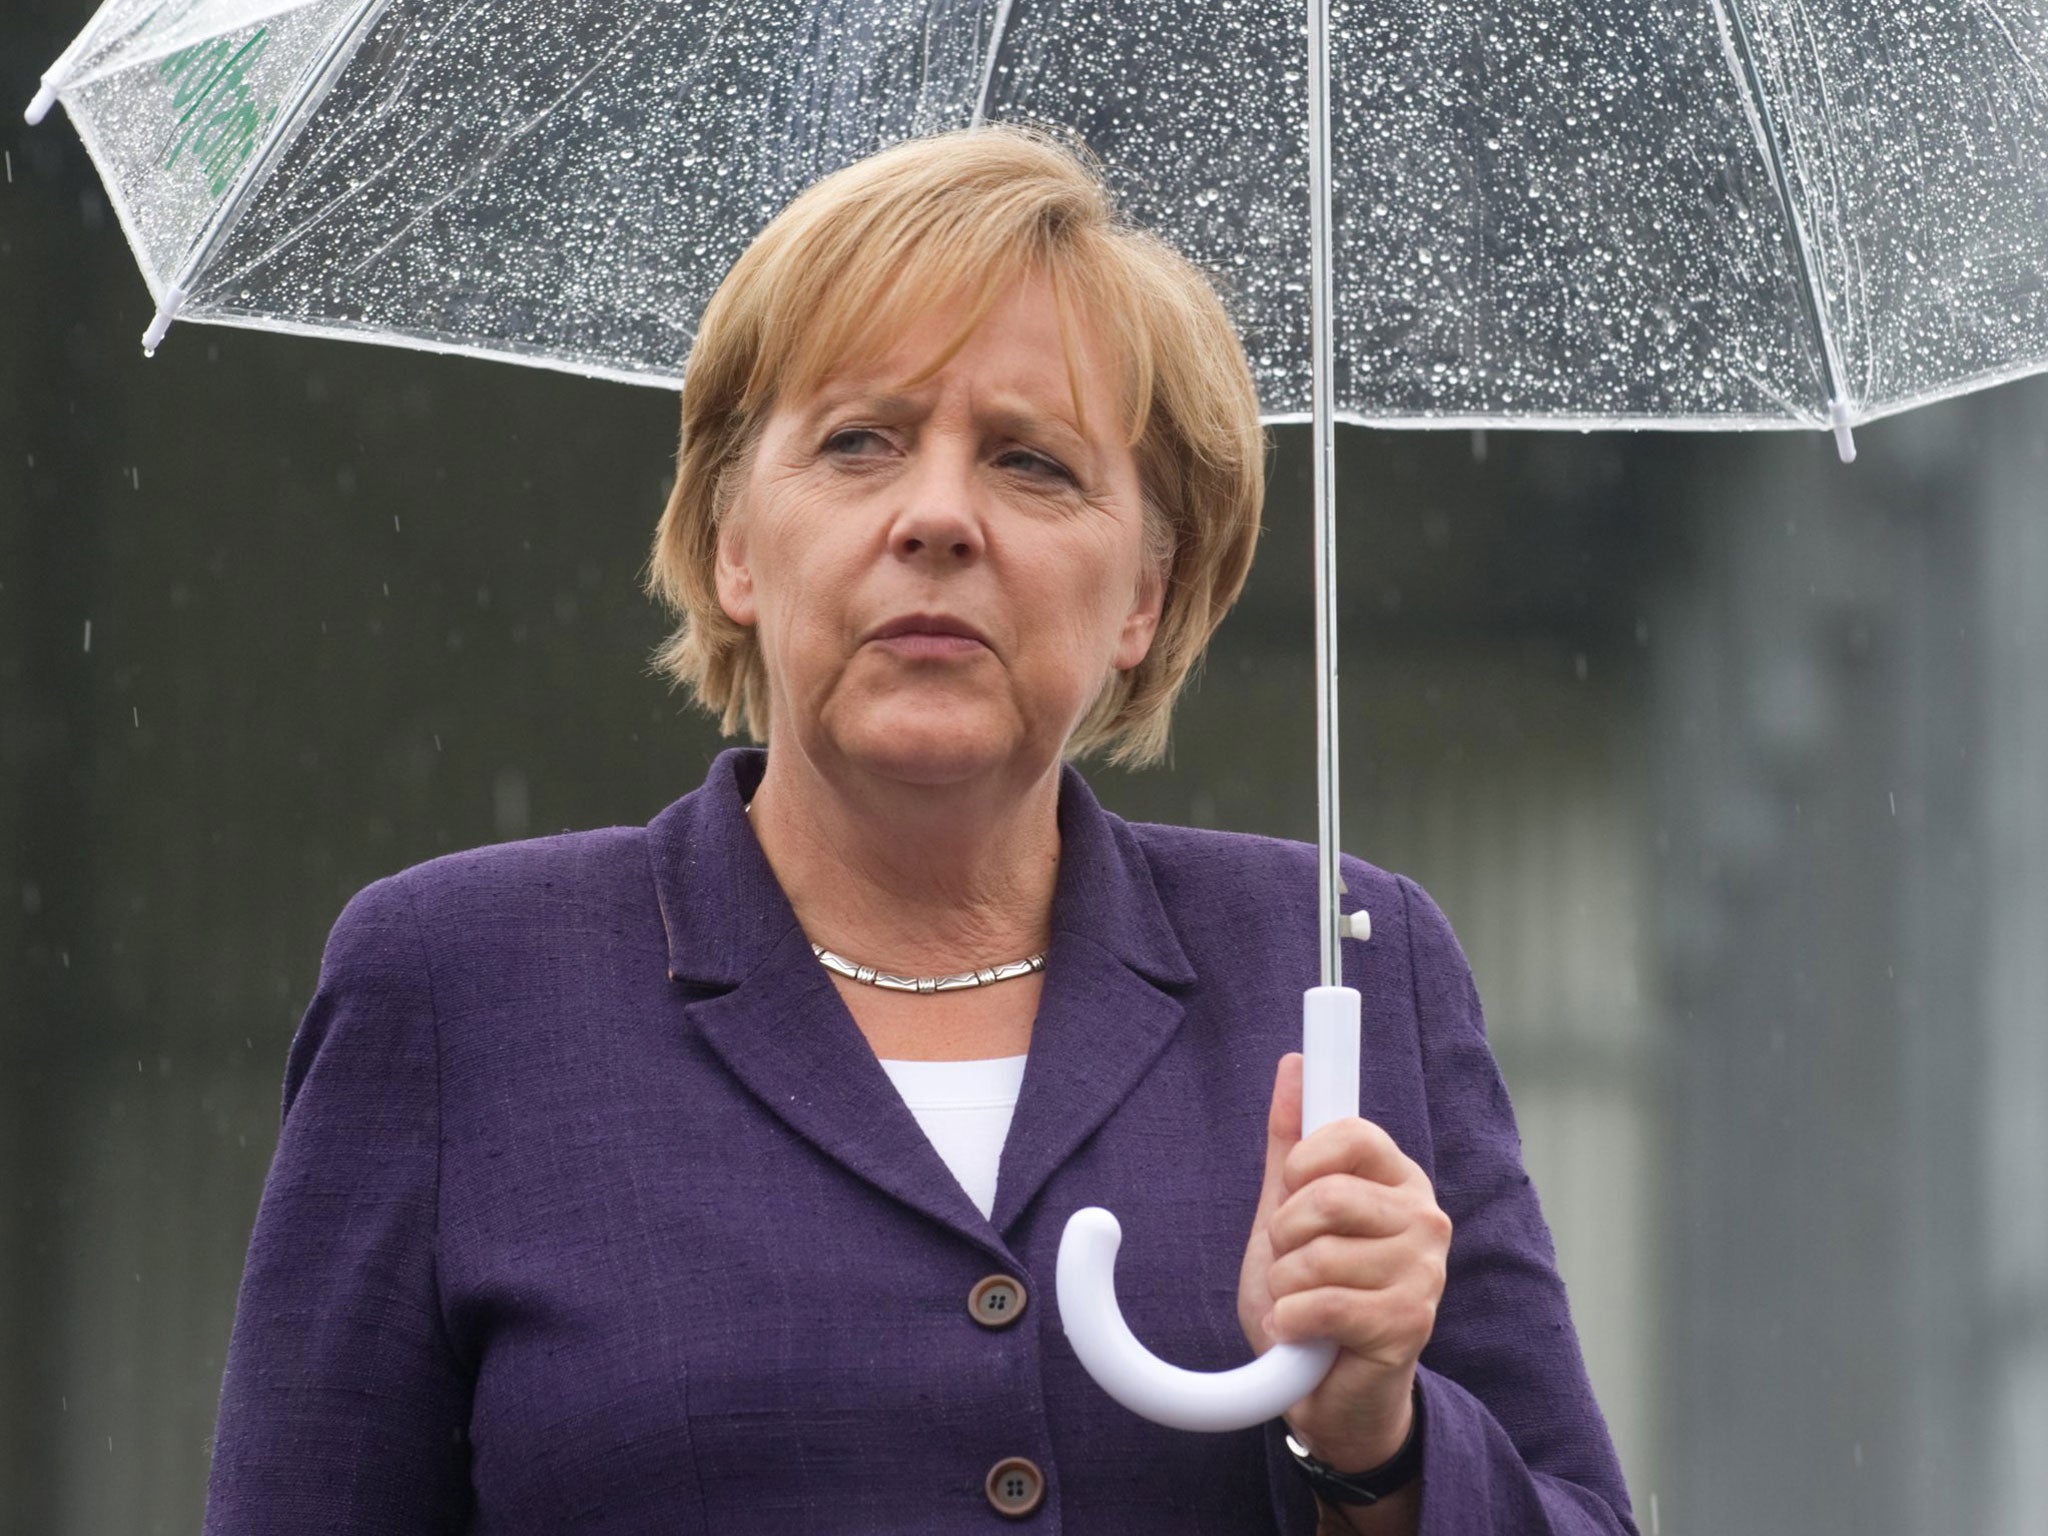 'S***storm' is a word Chancellor Angela Merkel likes, having used it to describe the Eurozone crisis